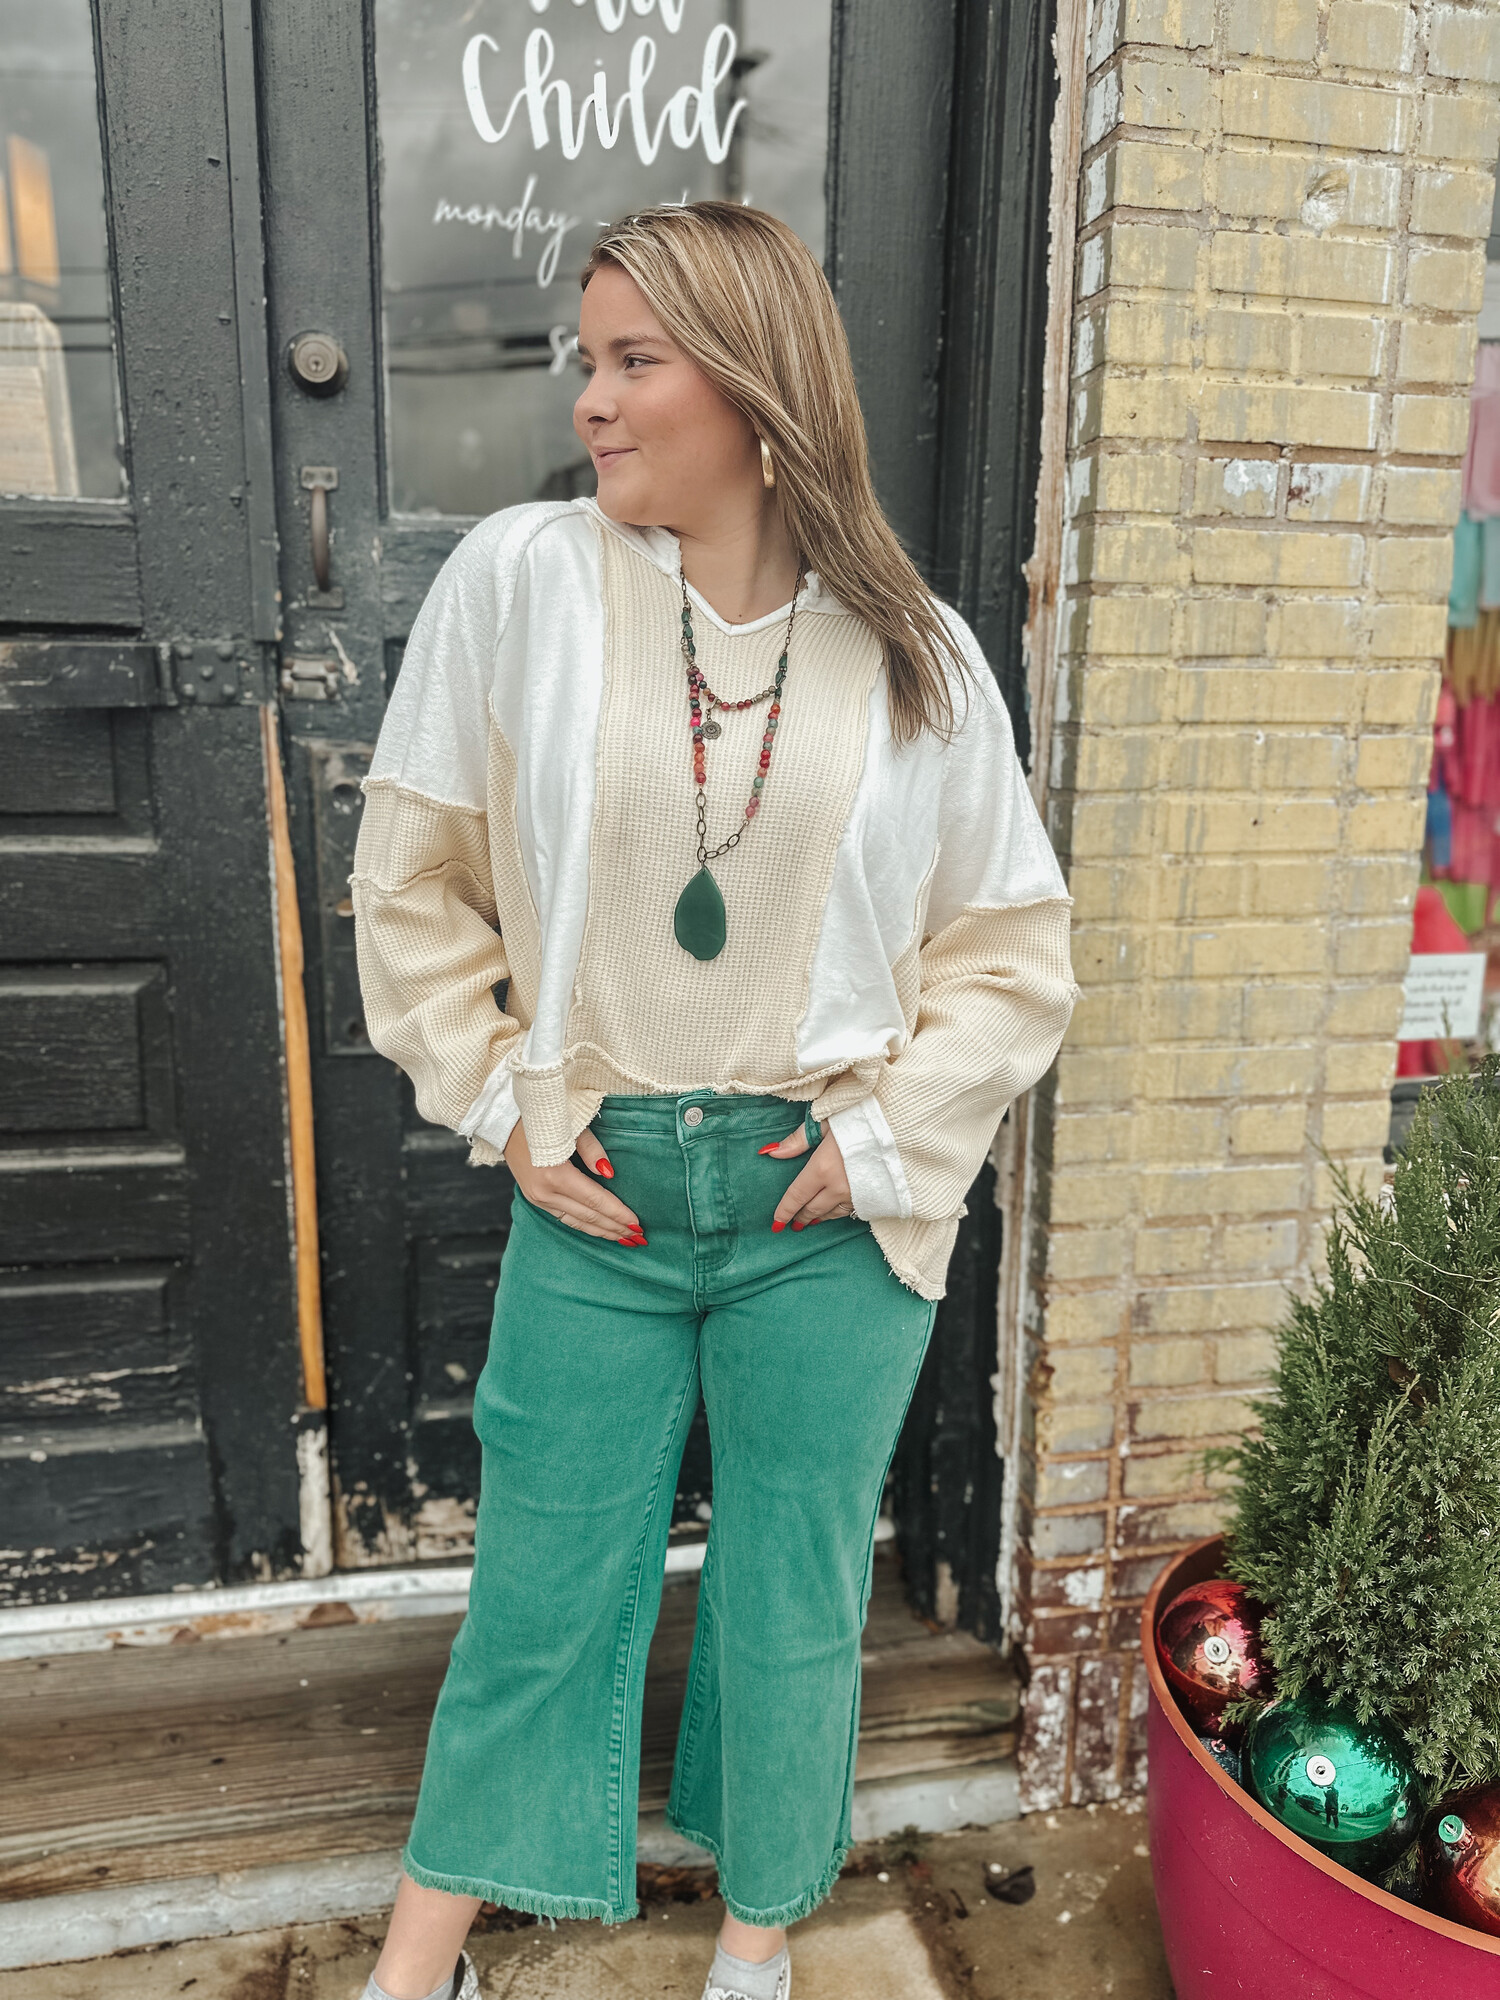 The perfect jeans for the holiday season! Pair with a cute top and some booties!